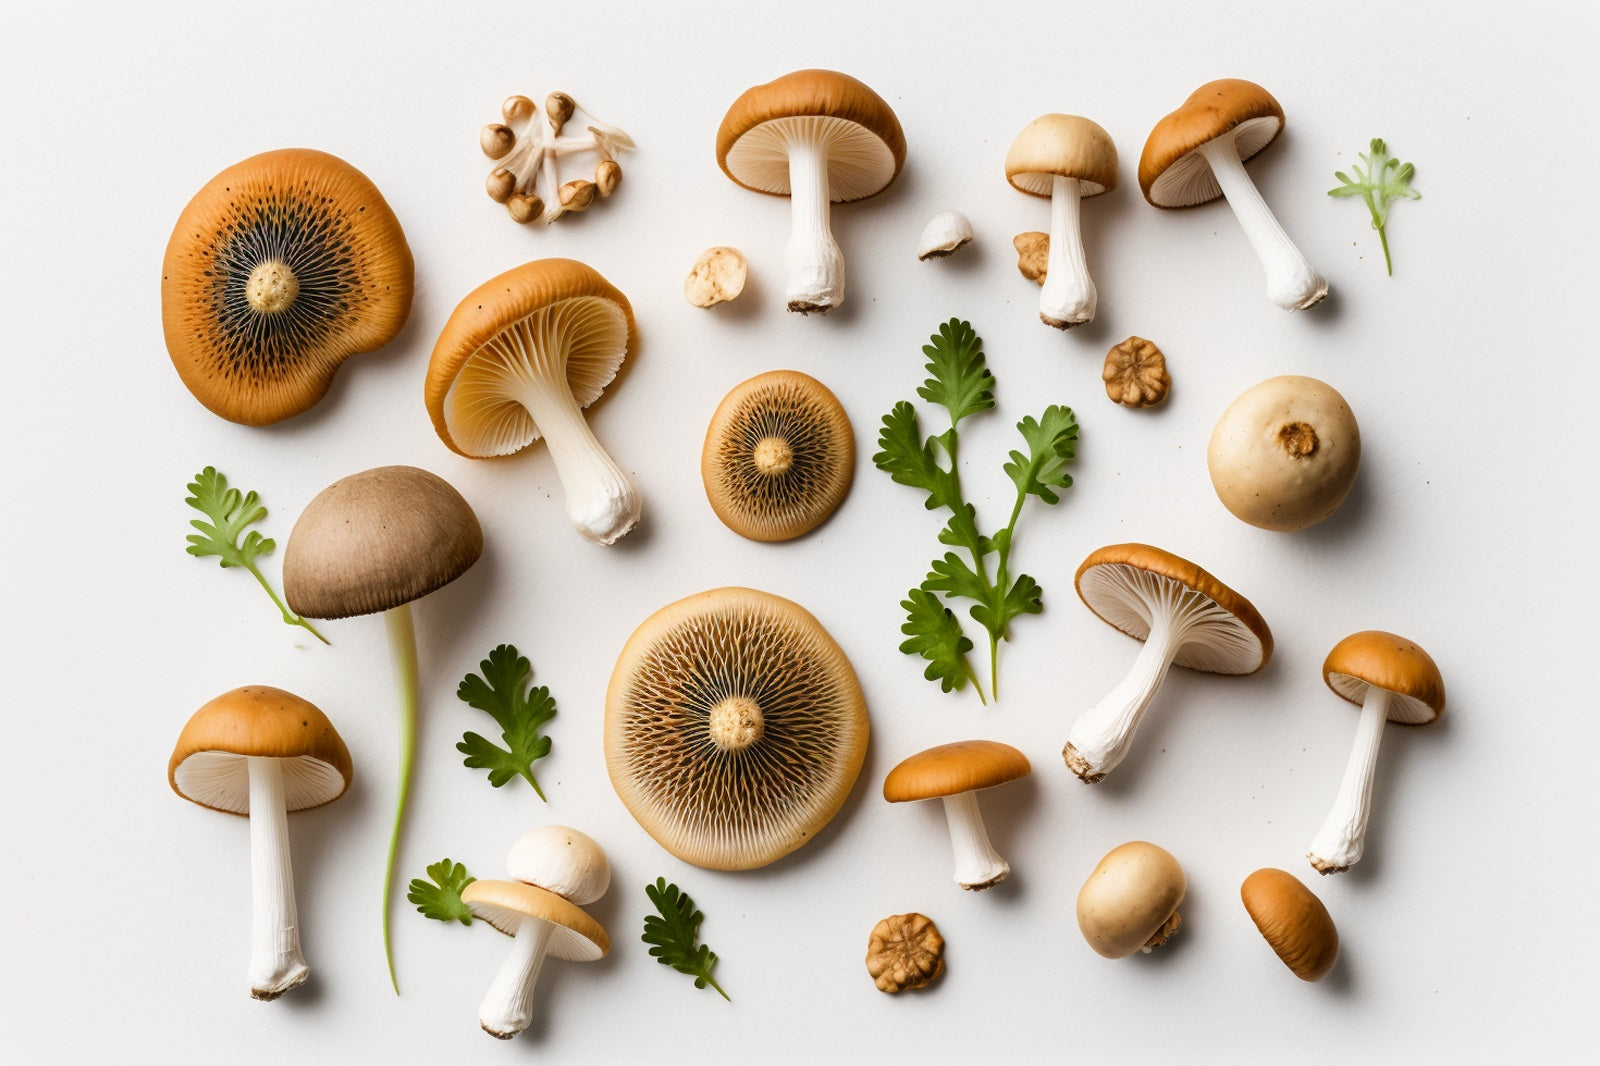 Different types of Mushrooms placed on a white table